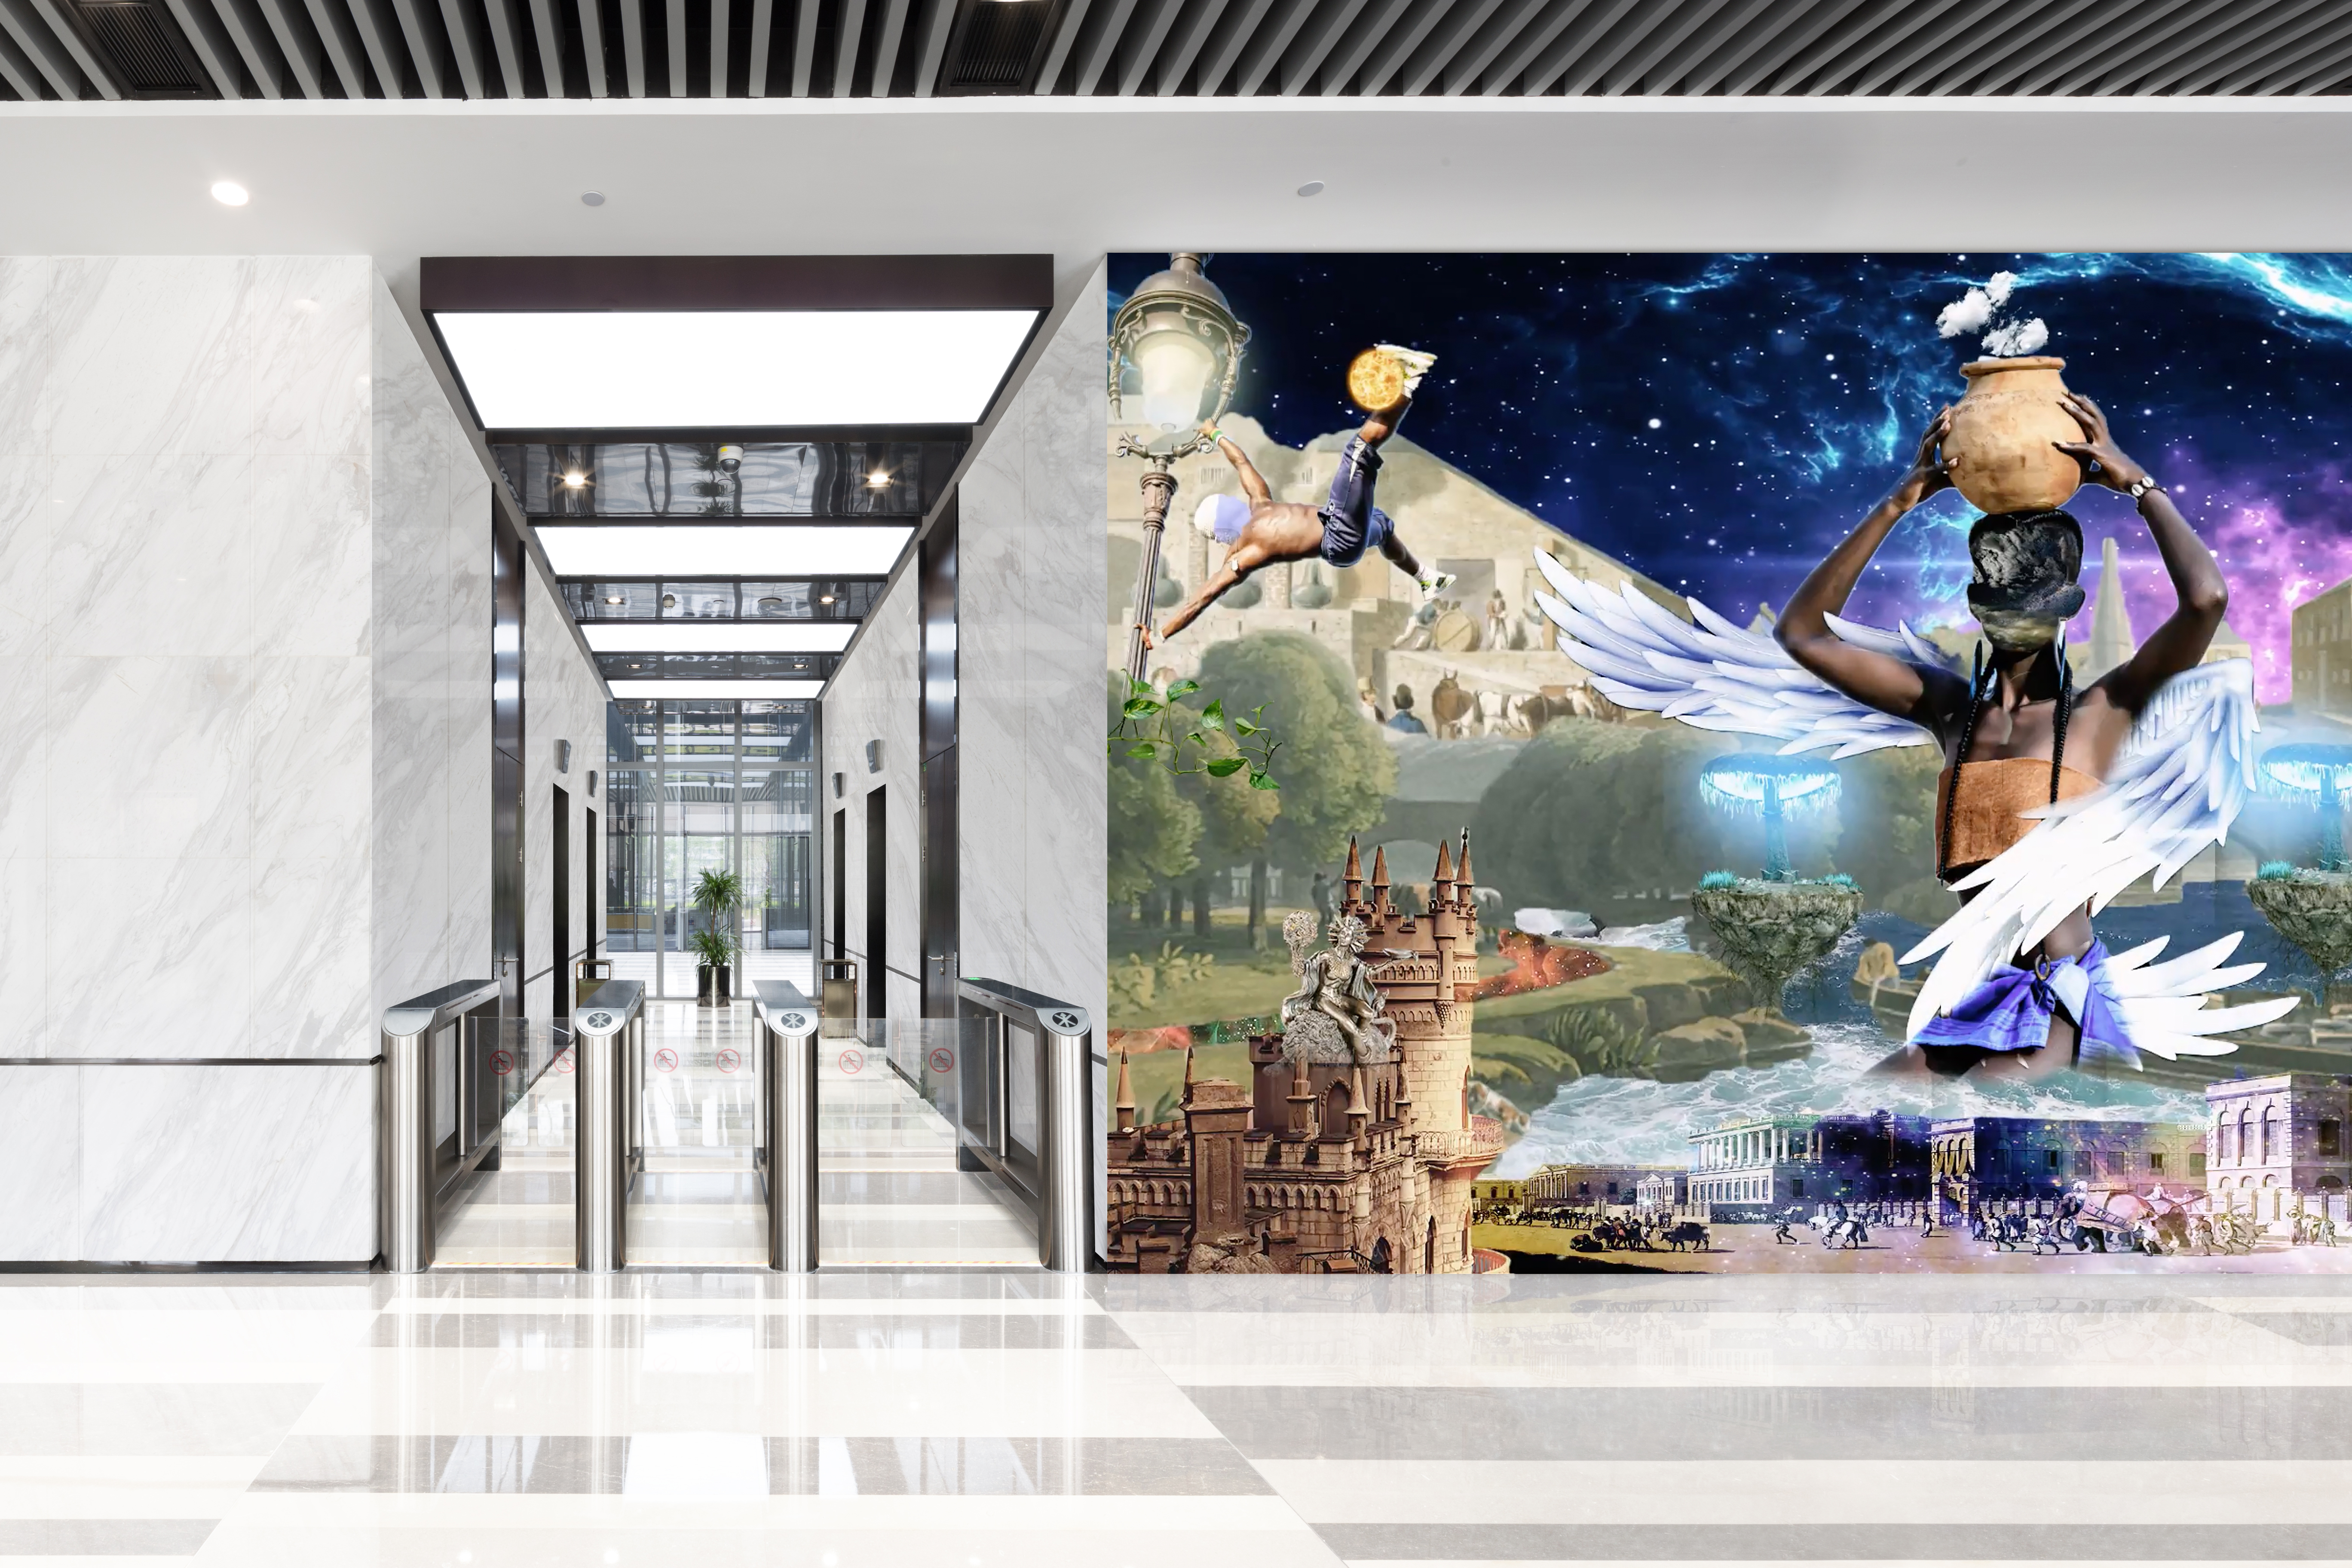 LG And BLACKDOVE Deliver Seamless Digital Art Experience On LG LED Signage